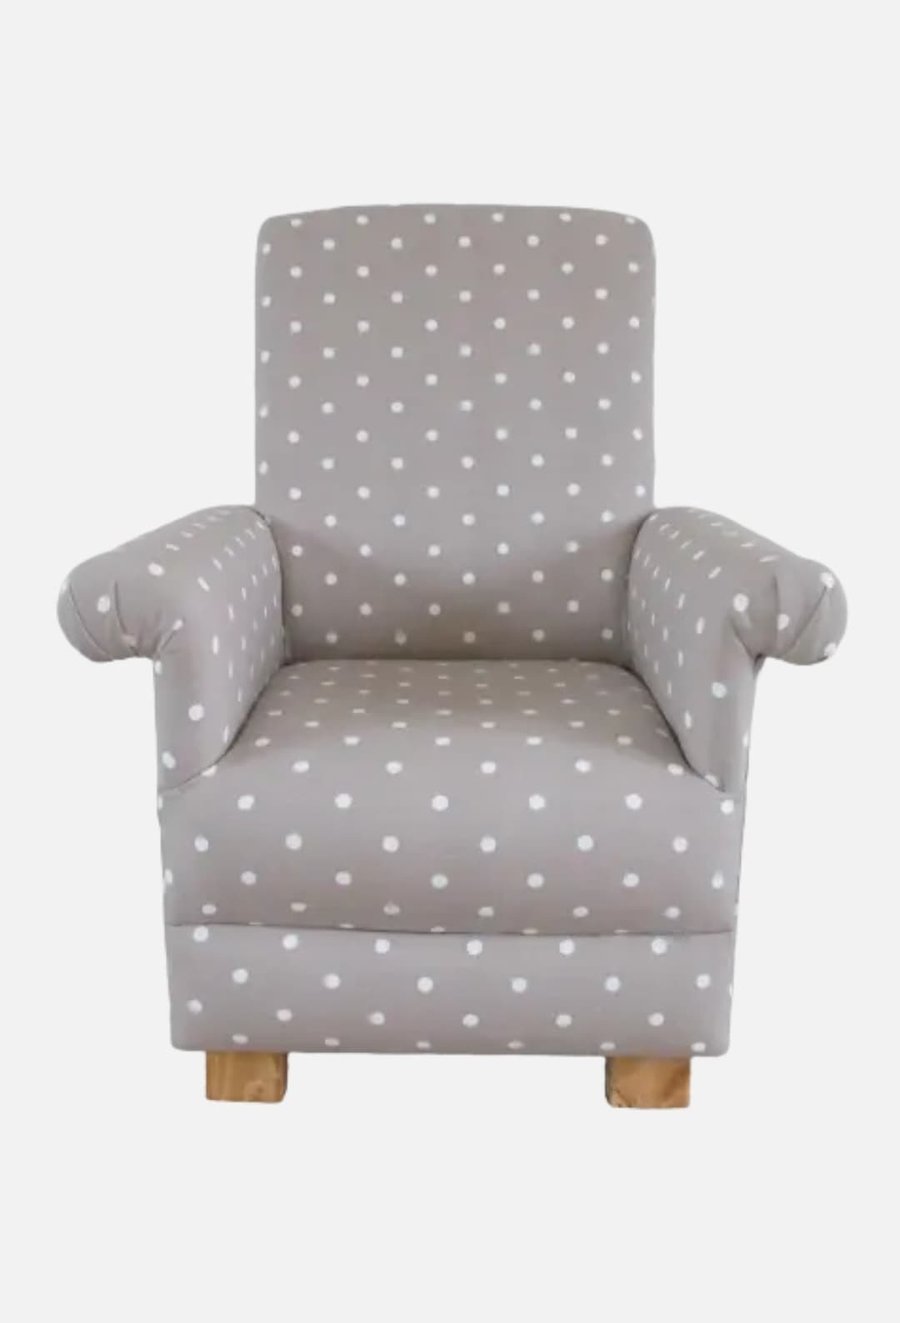 Child's Taupe Dotty Spot Fabric Chair Armchair Beige Polka Dots Brown Spots